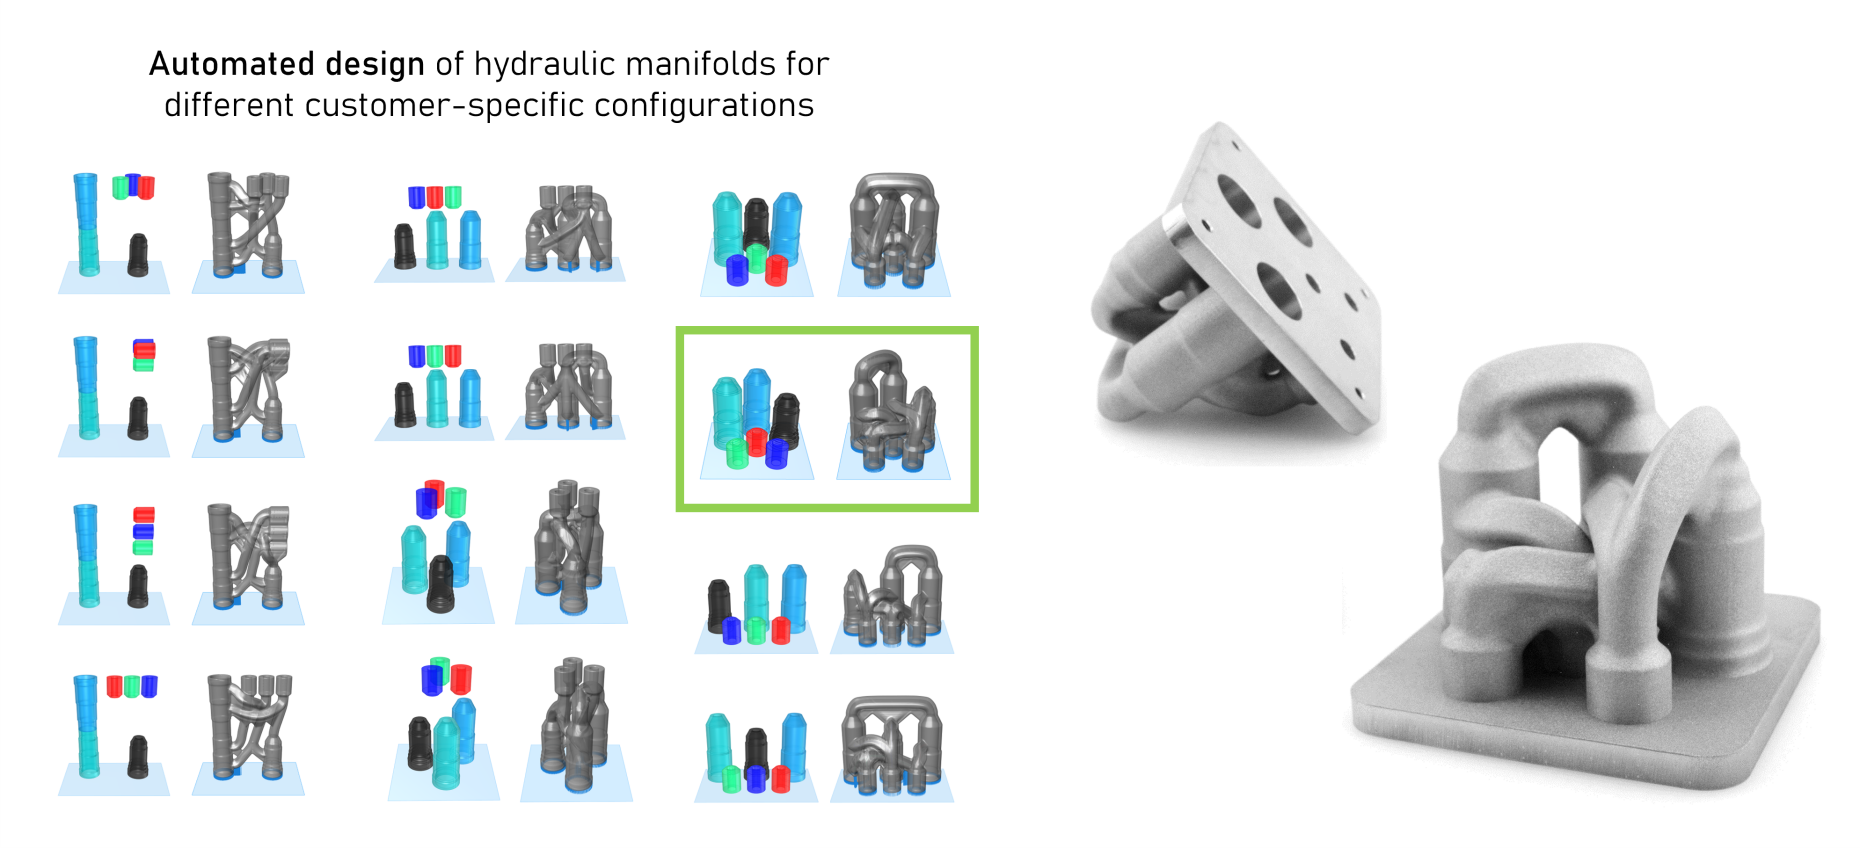 Enlarged view: Digital design and additive manufacturing of hydraulic manifolds with automated consideration of manufacturing constraints